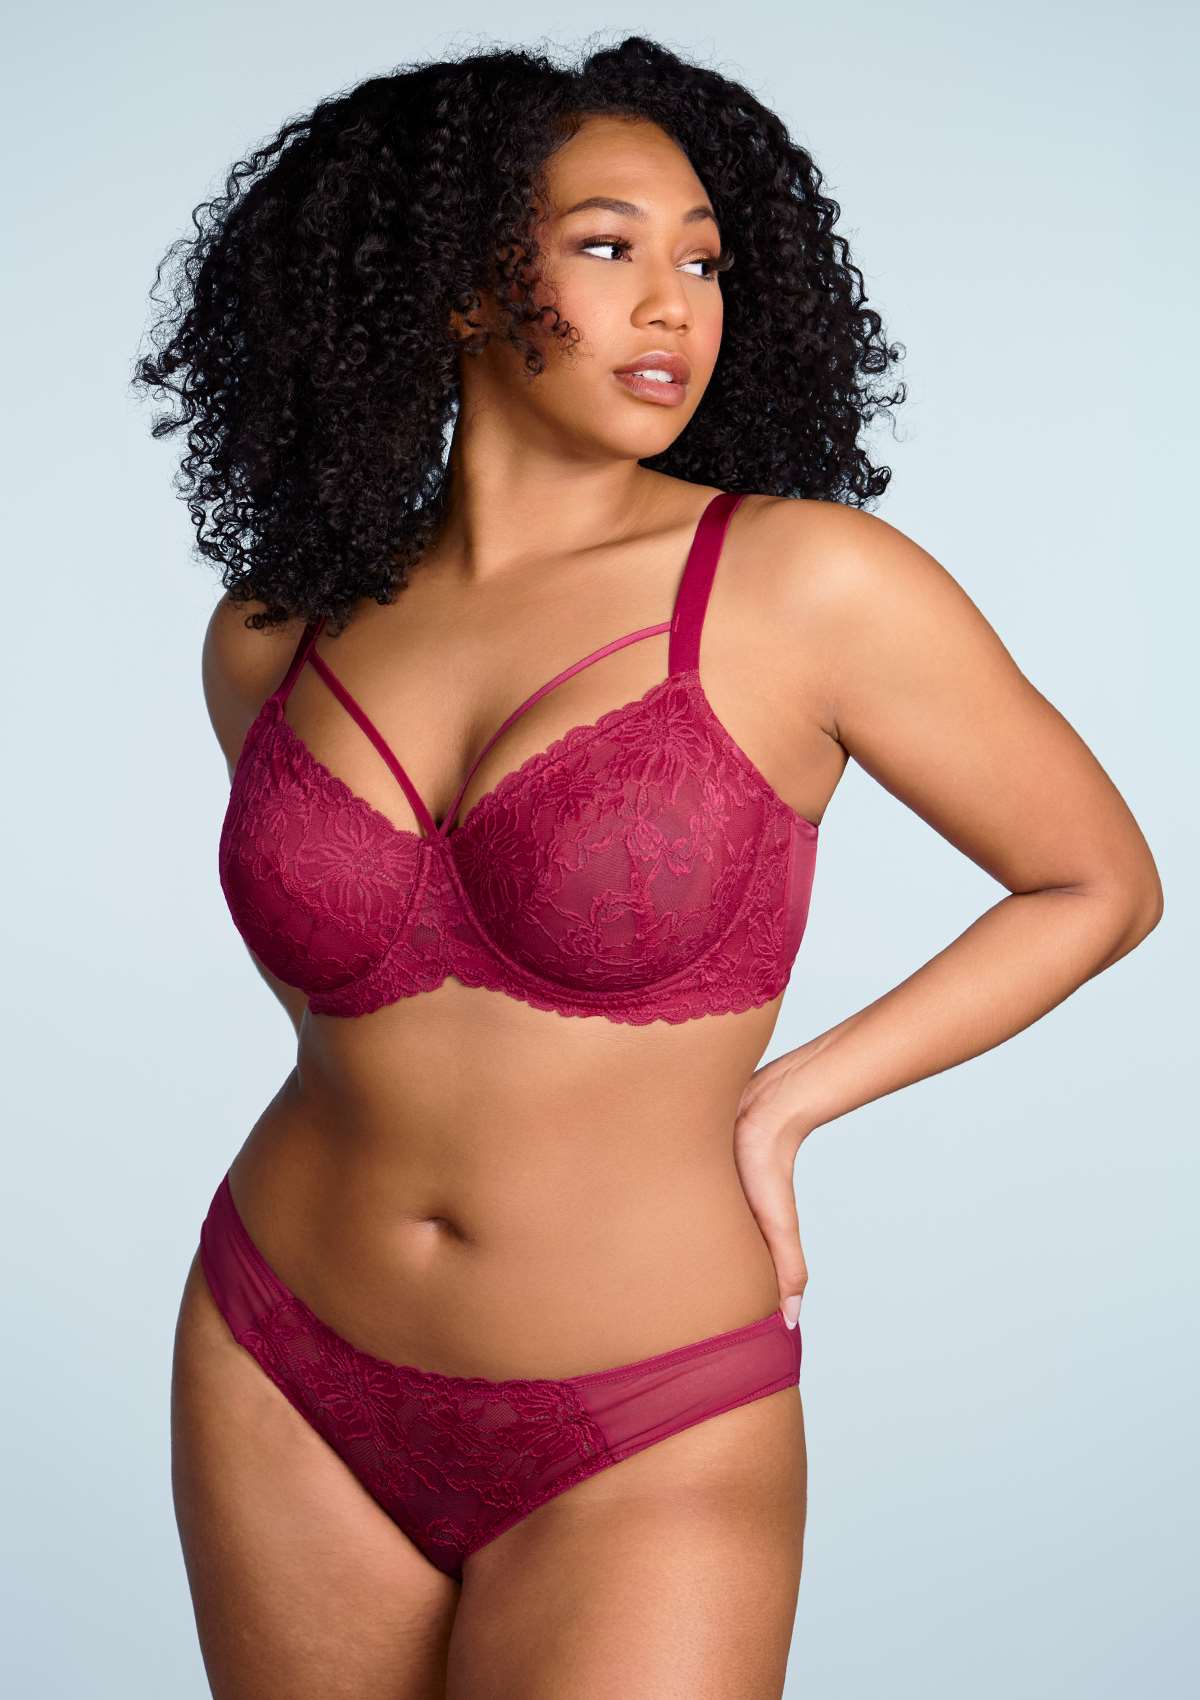 HSIA Pretty In Petals Lace Panties And Bra Set: Plus Size Women Bra - Red / 42 / DDD/F